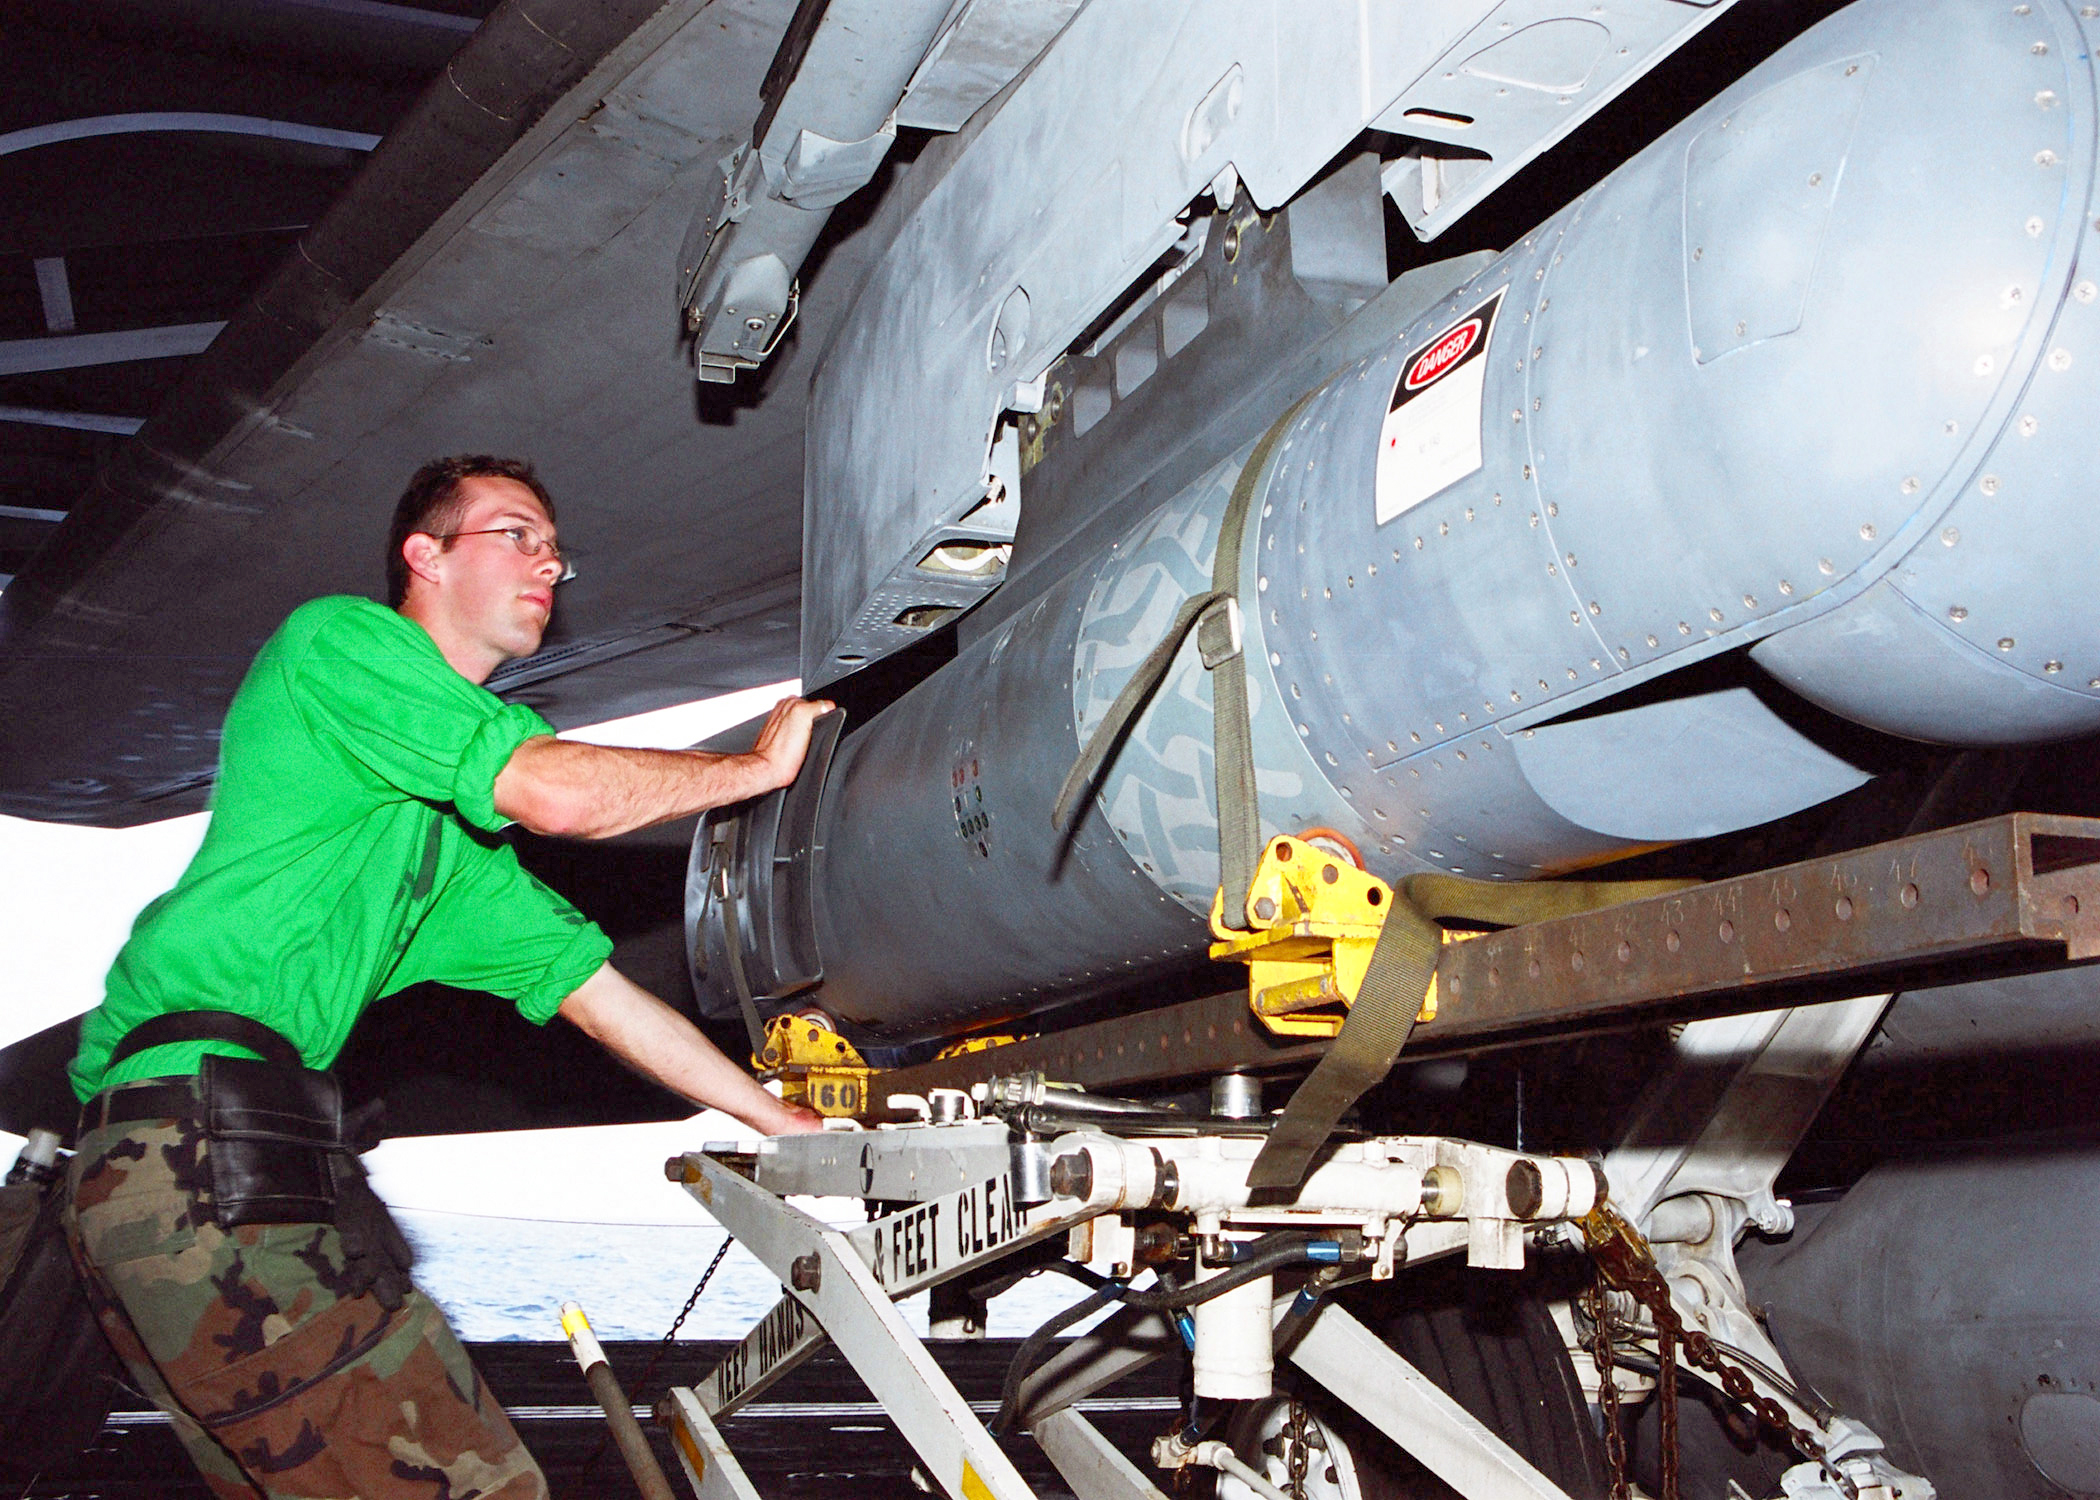 US Navy 030122-N-9403F-002 Electronics Technician 2nd Class Michael Weston of Sedley, Calif., loads a Forward Looking Infrared (FLIR) pod under the wing of an F-14D Tomcat fighter aircraft